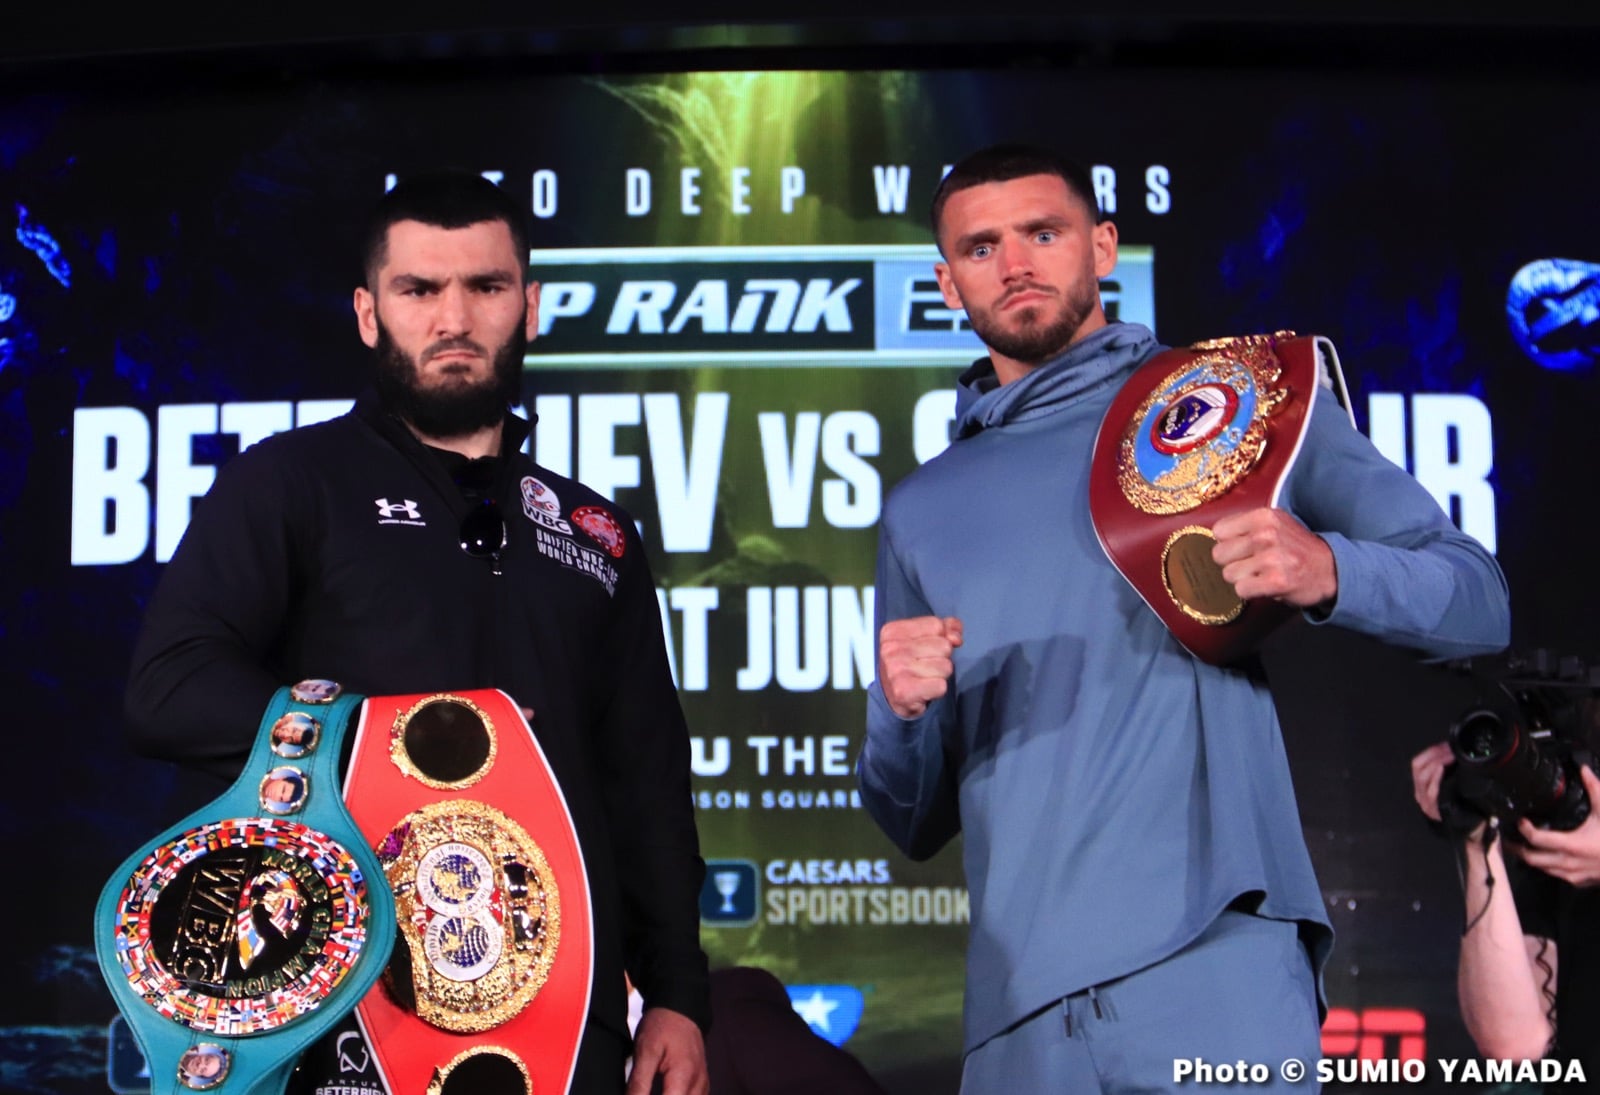 Image: Smith Jr. must keep Beterbiev on the outside to have a shot at winning